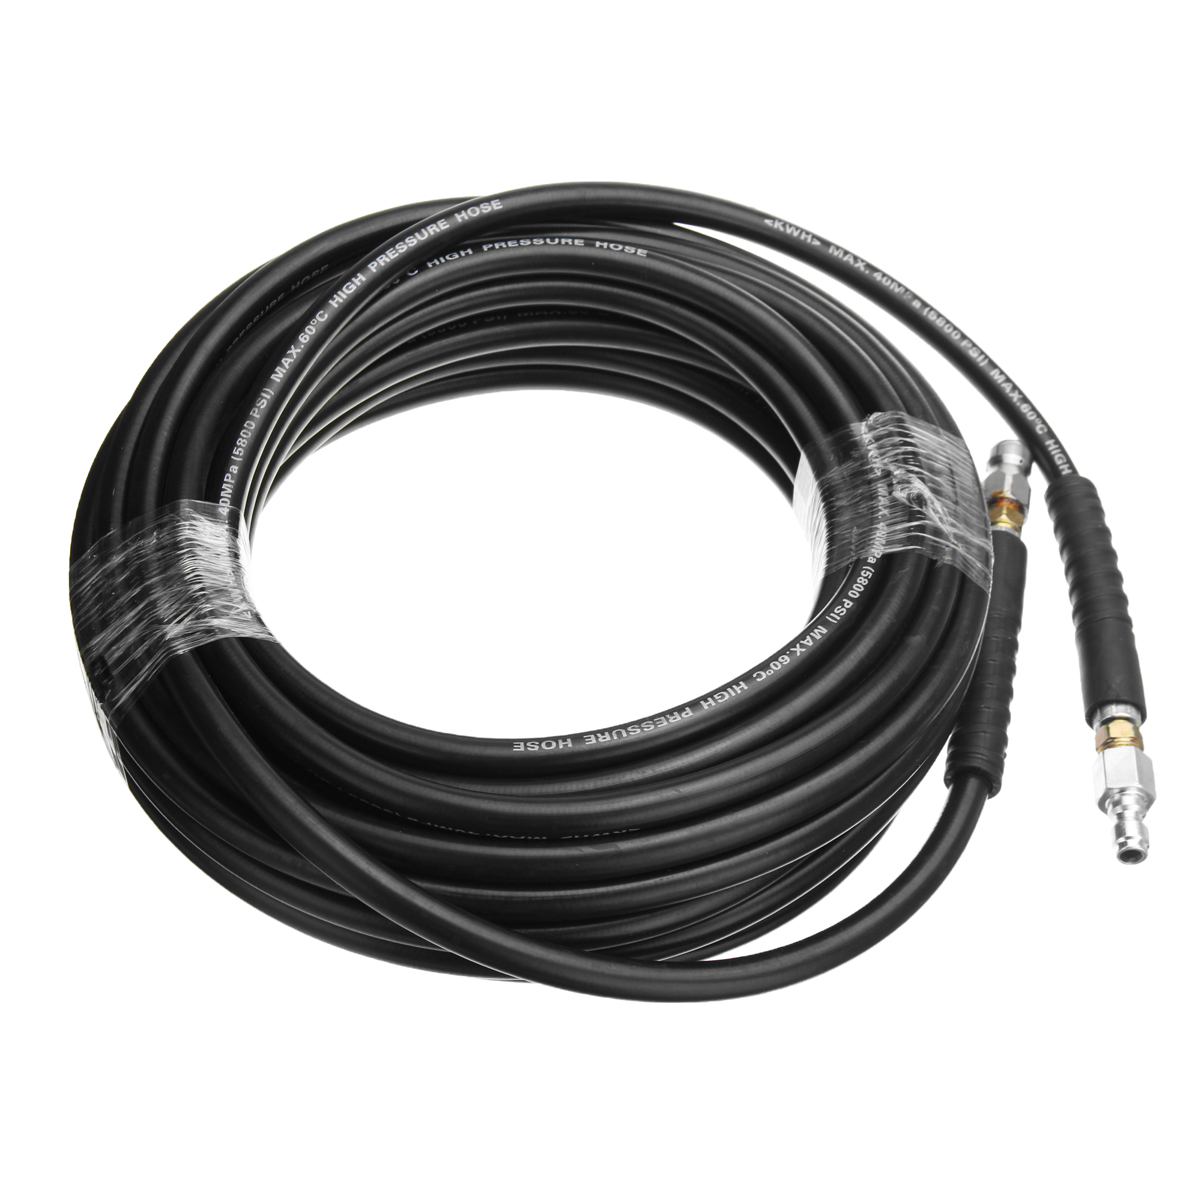 61015M-14-Inch-Quick-Release-Drain-Sewer-Cleaning-Hose-5800PSI-Pressure-Washer-Hose-1299882-2